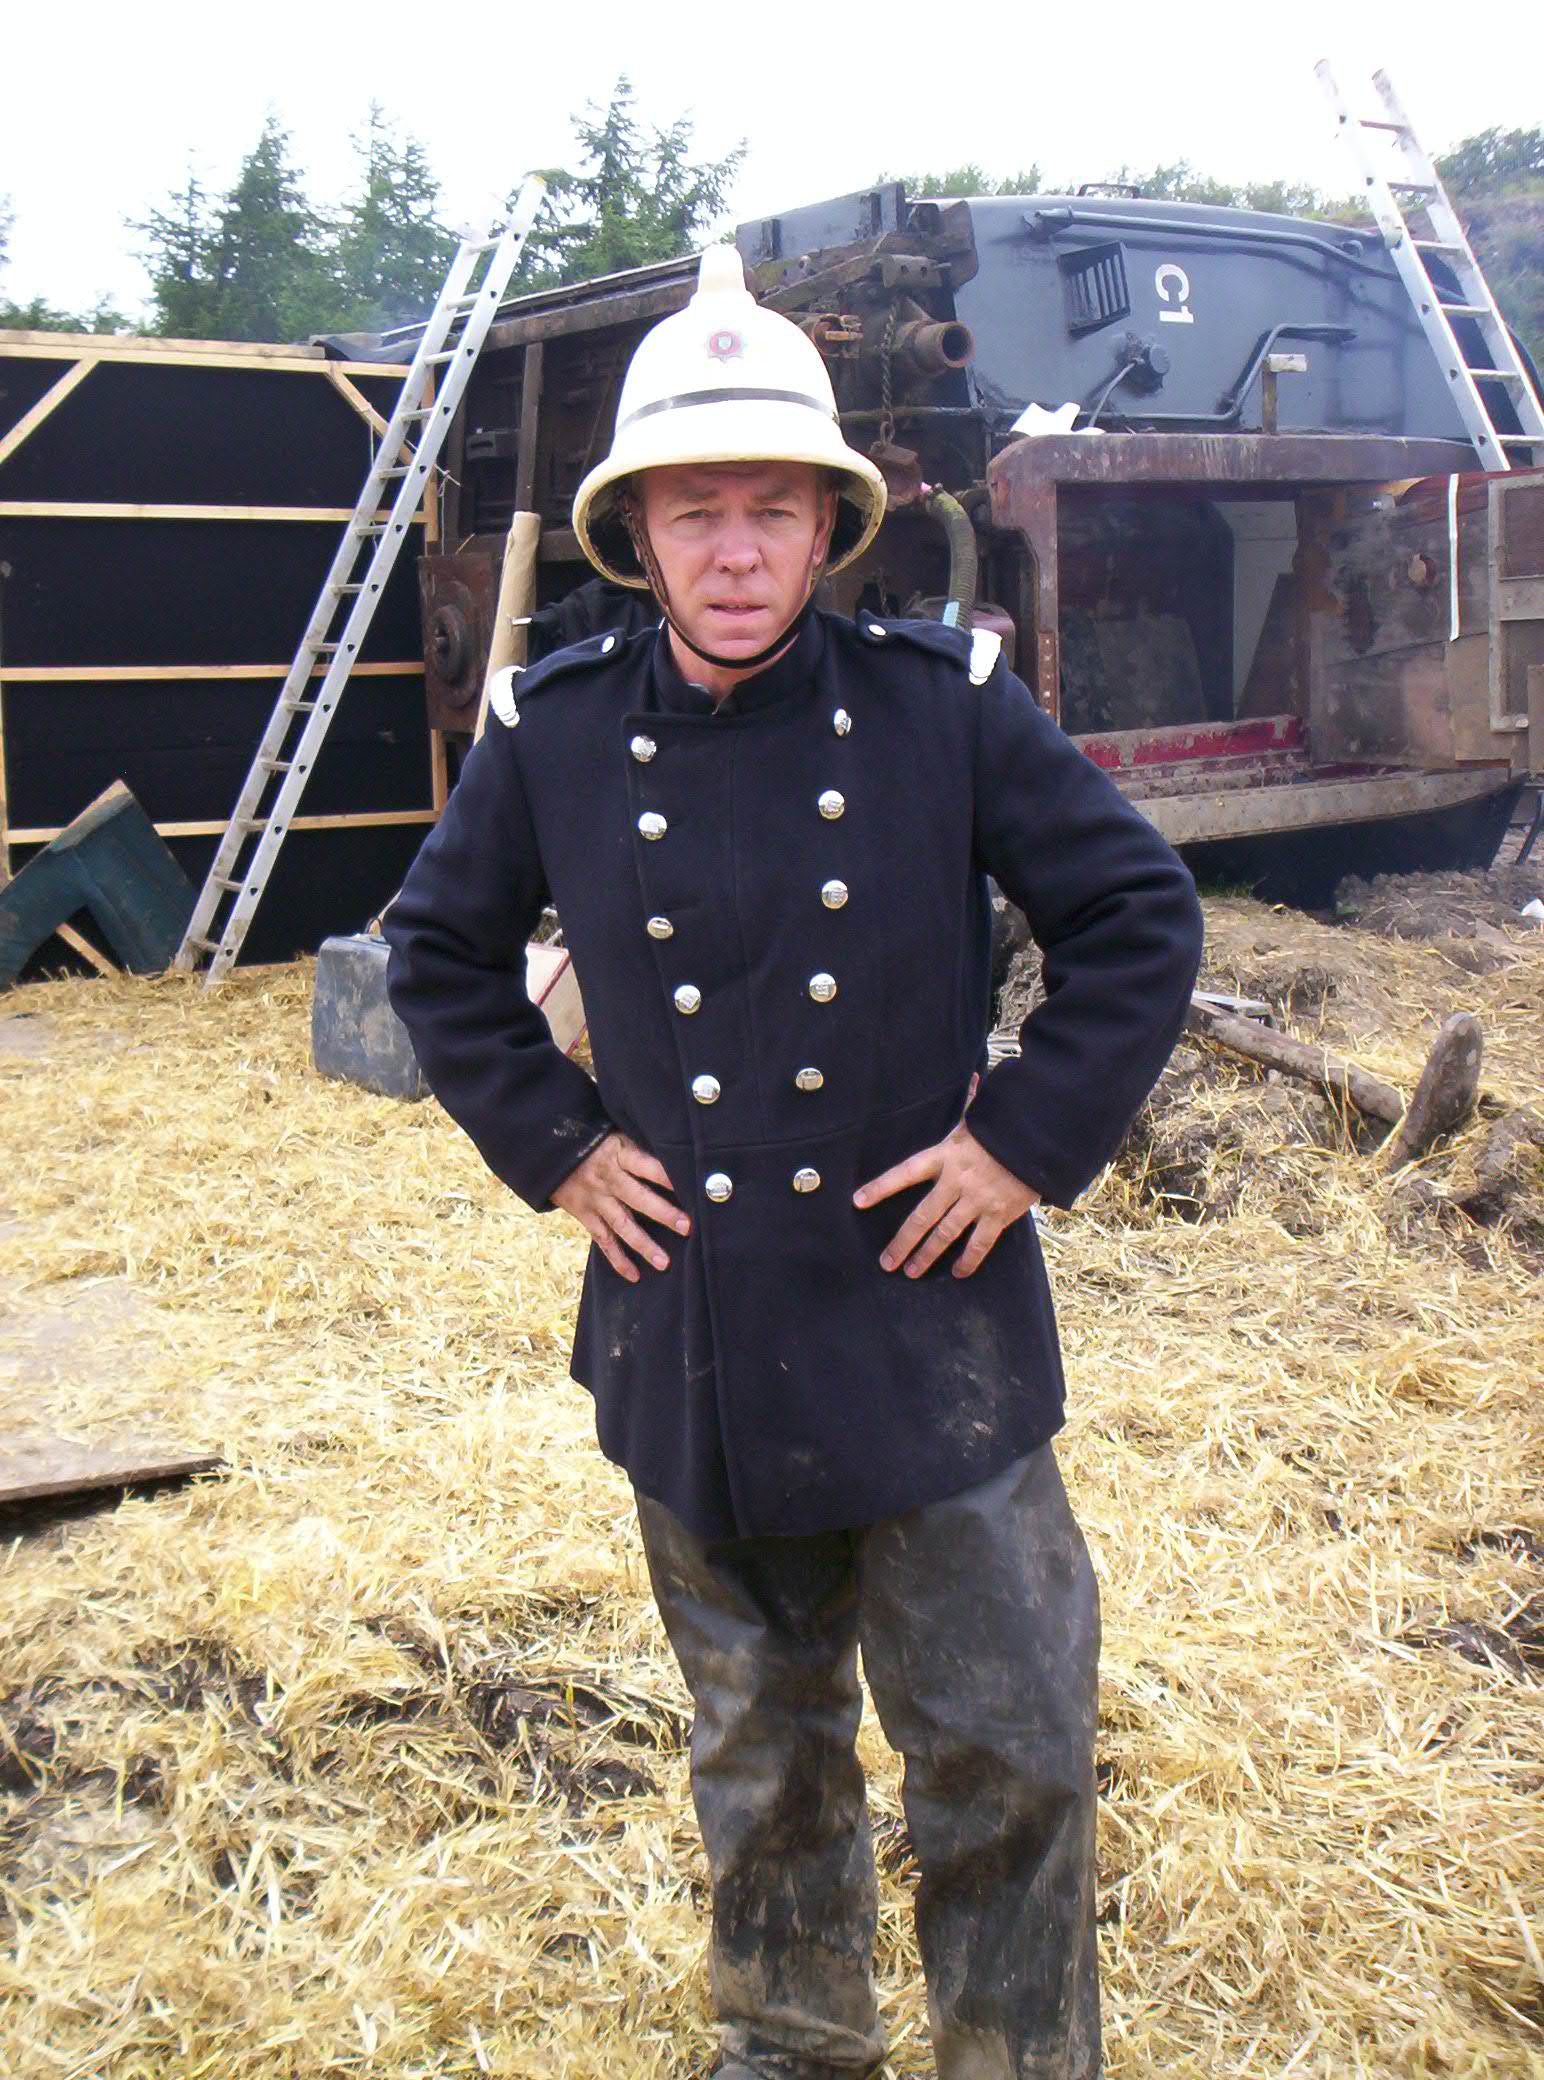 William as Chief Fire Officer Pratchett in THE ROYAL - ITV 1 2008